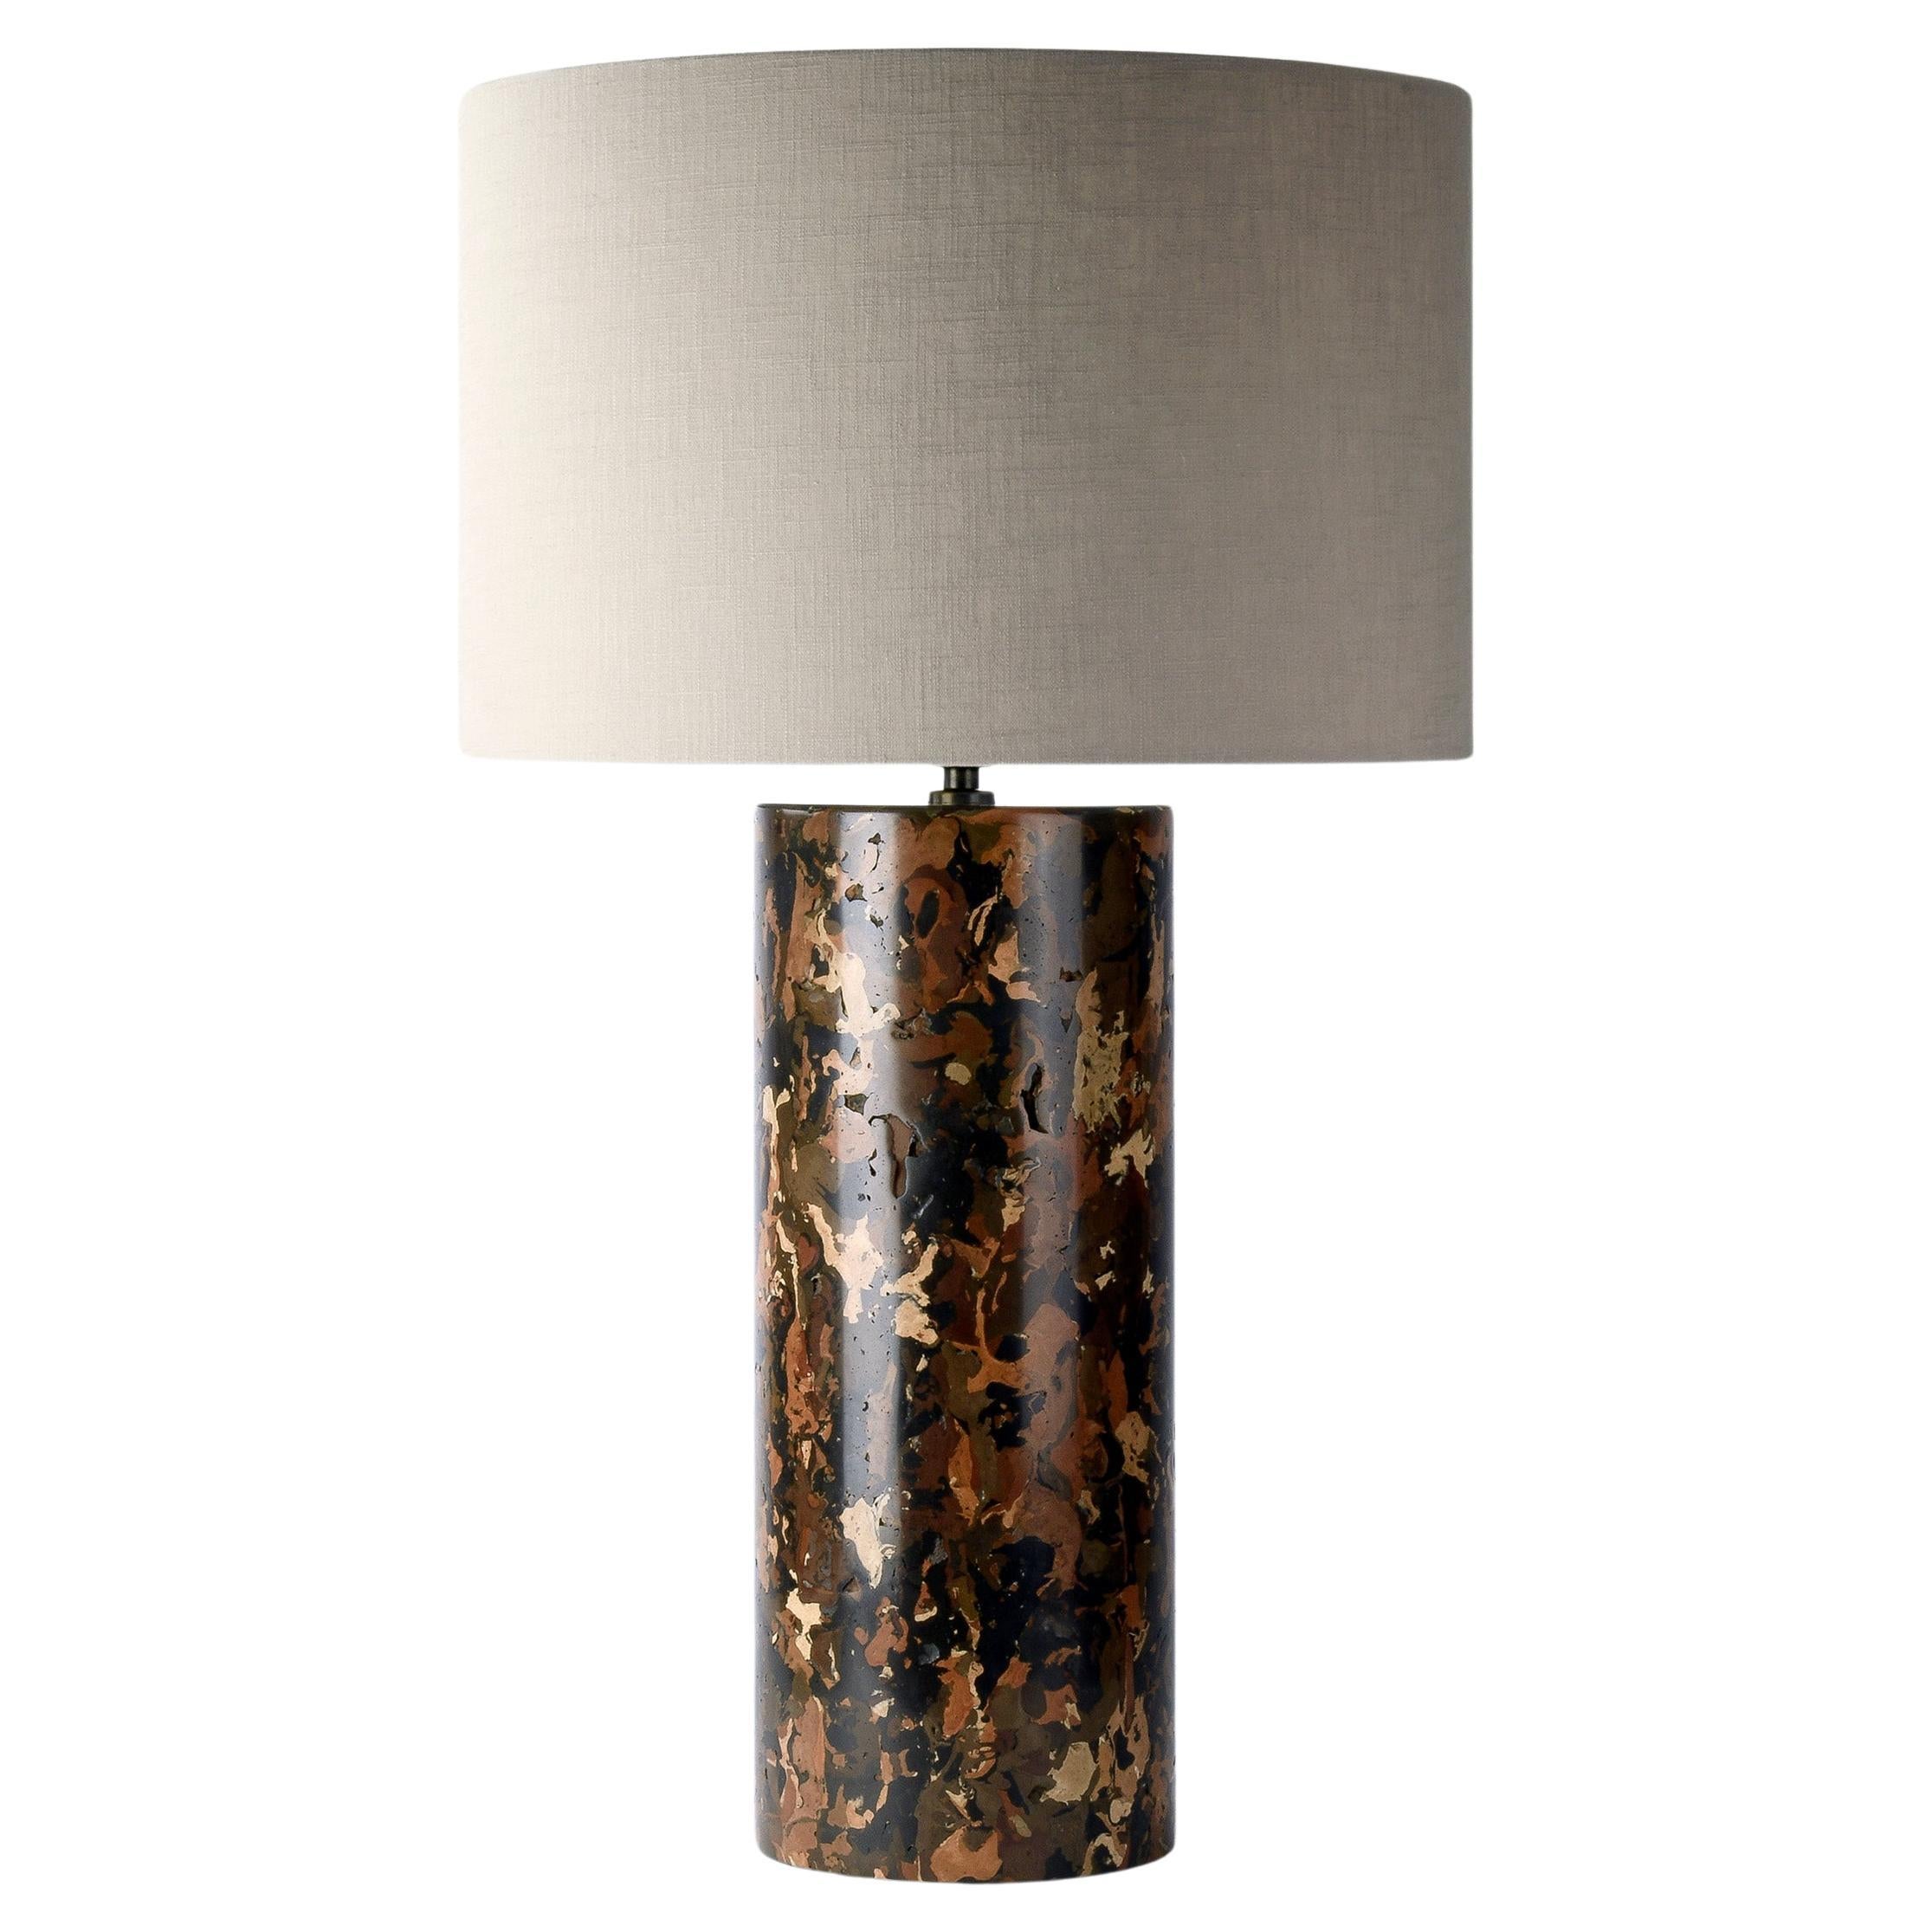 Scagliola Table Lamp For Sale